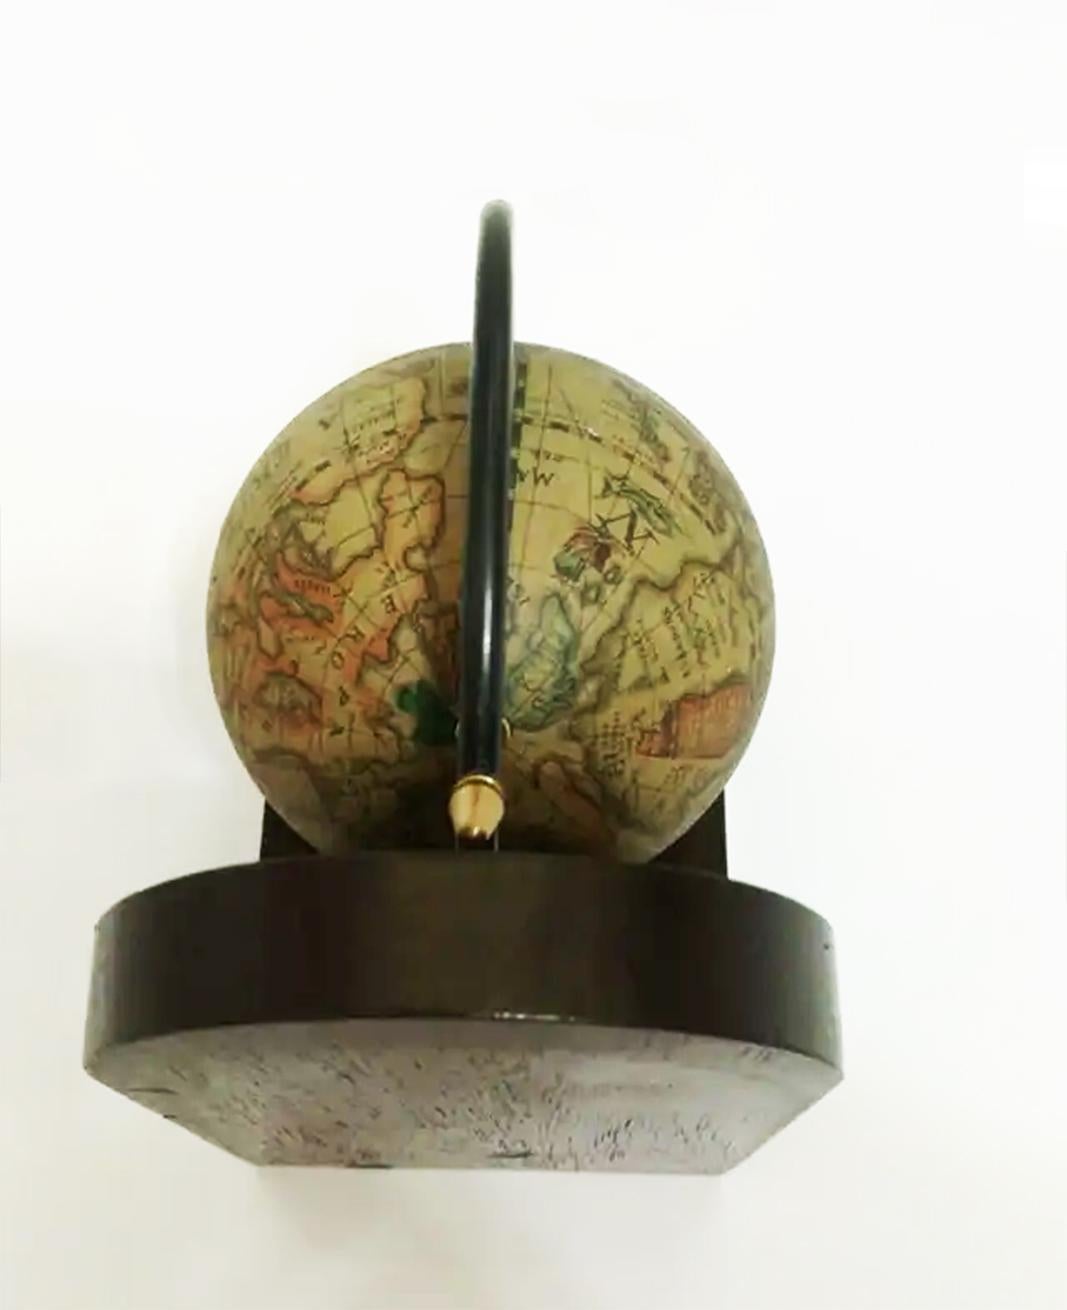 Pair of midcentury world globe bookends

They globes are two pieces of timeless design and high quality, ideal for a very masculine and sophisticated environment
These pieces are ideal to place in your office or living room and evoke the